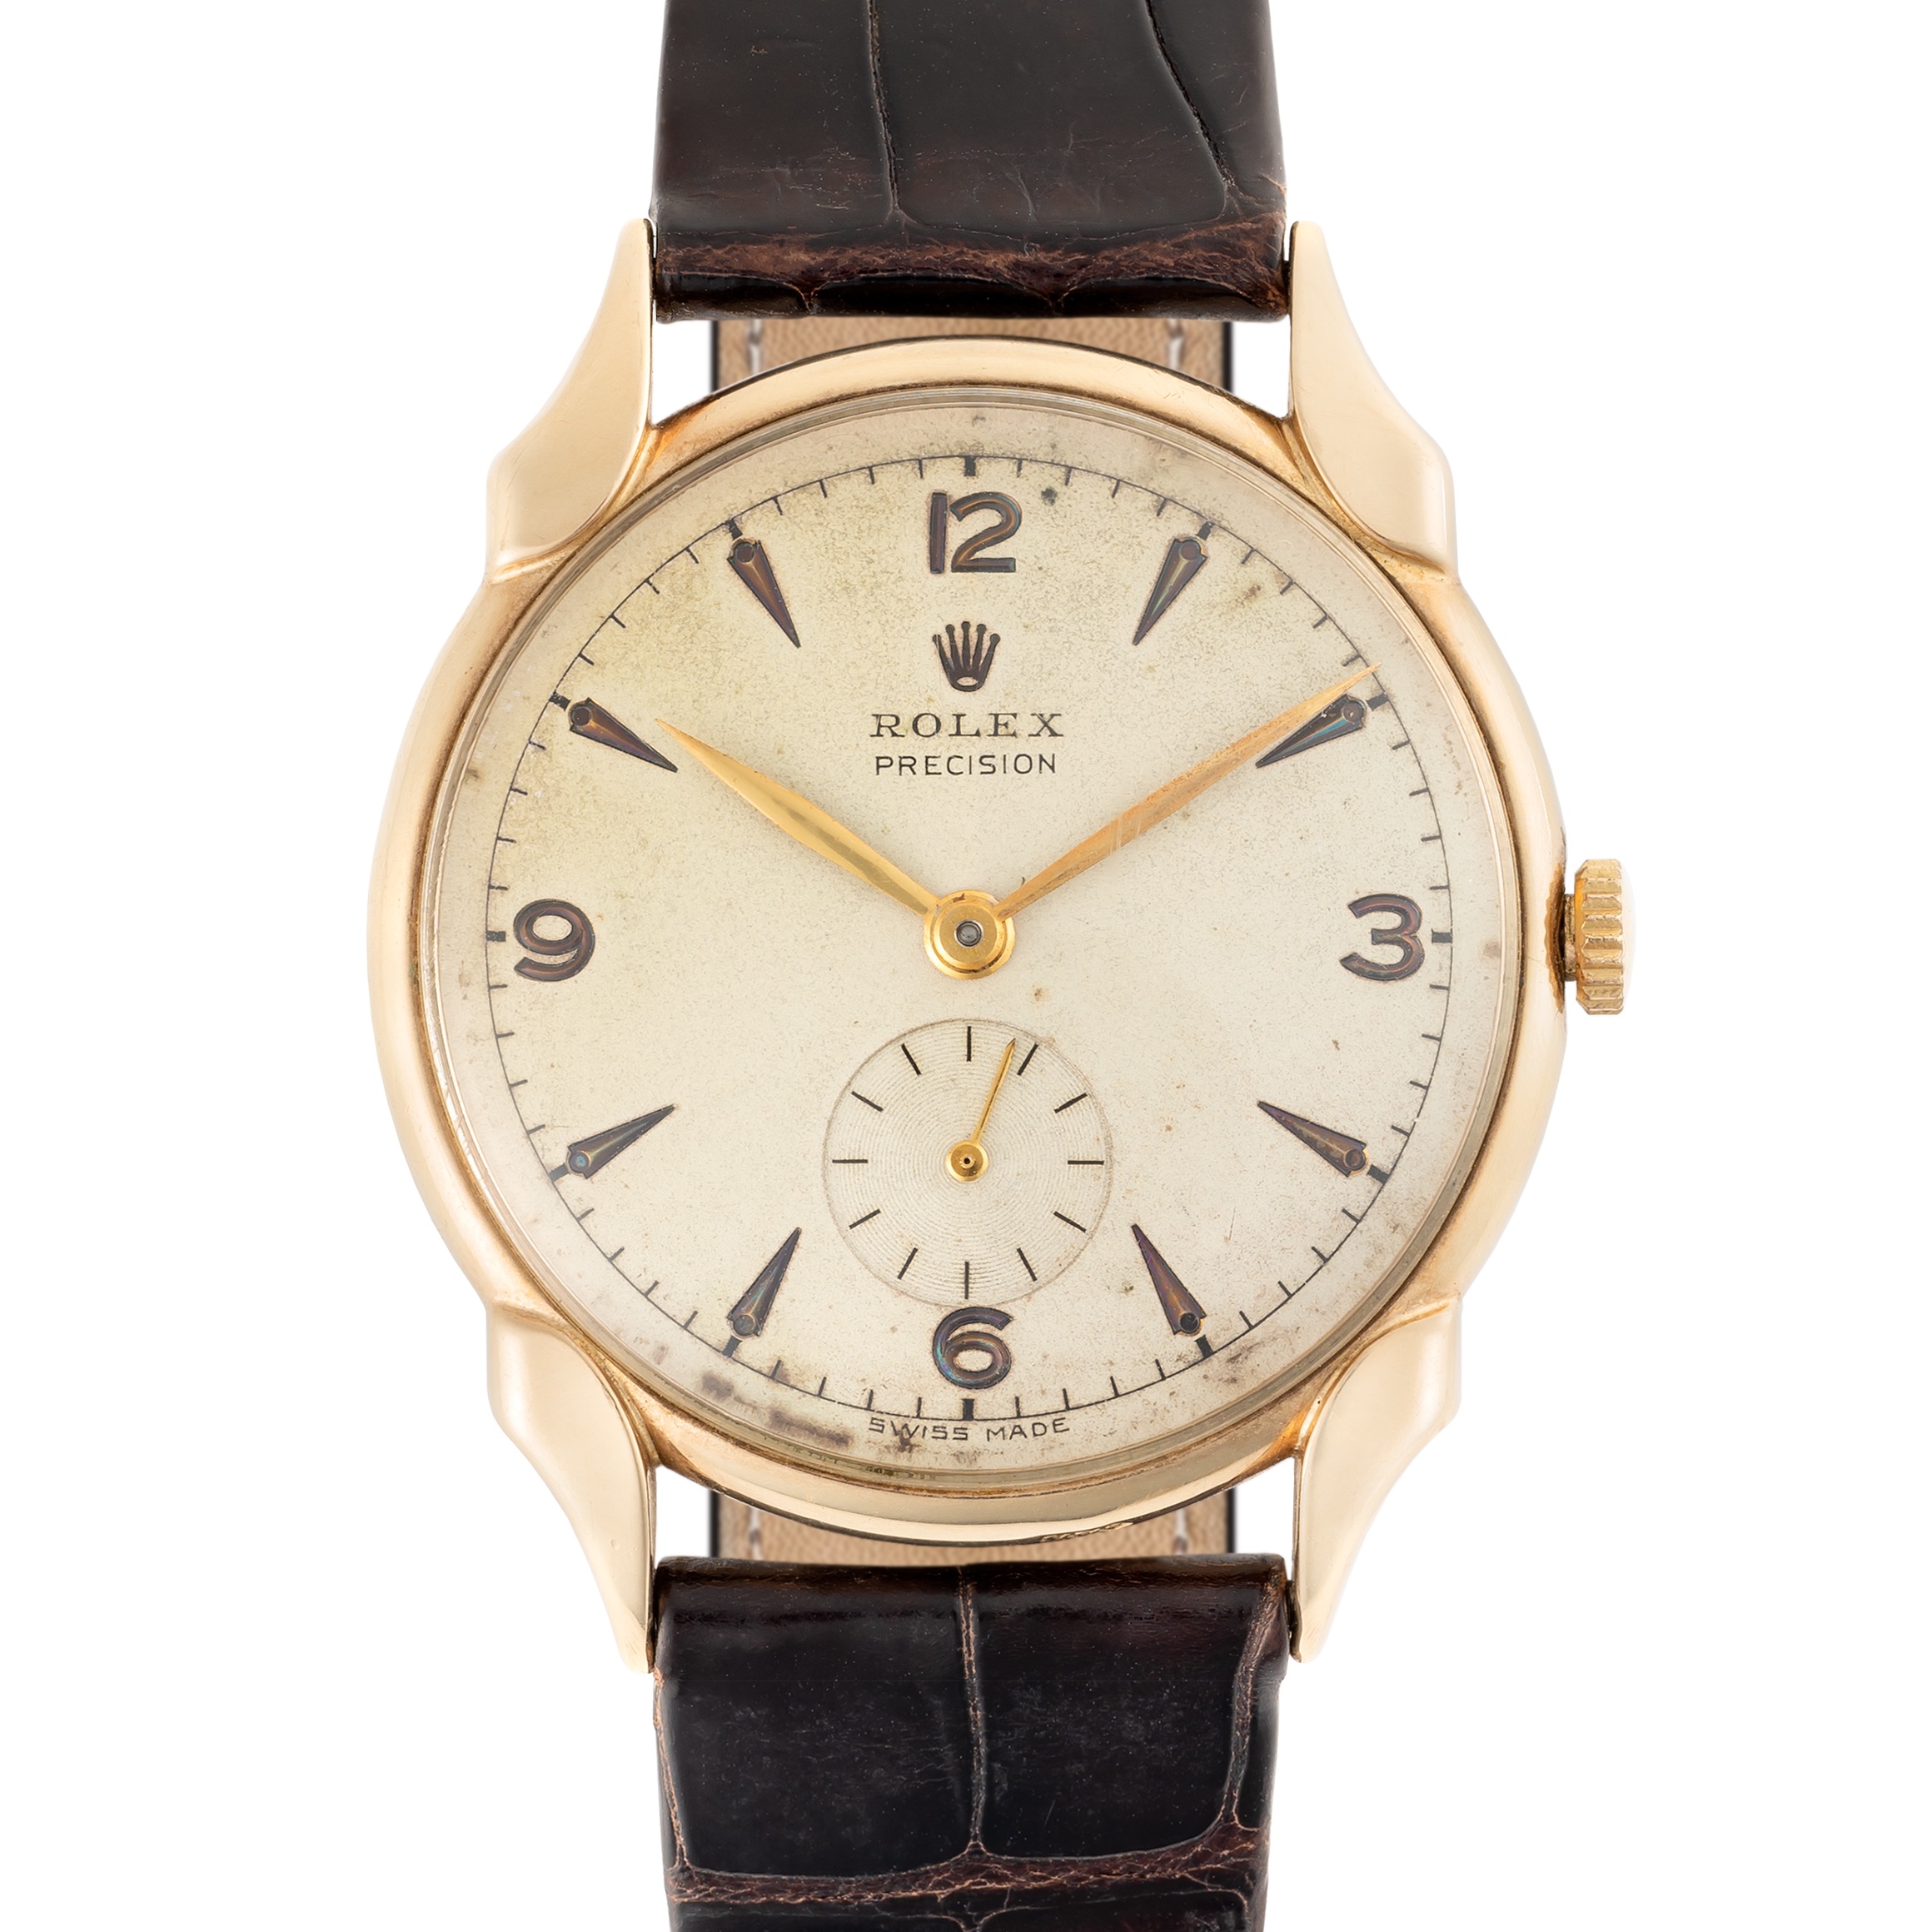 A RARE GENTLEMAN'S SIZE 9CT SOLID GOLD ROLEX PRECISION WRIST WATCH CIRCA 1950s, WITH SCALLOPED - Image 9 of 9